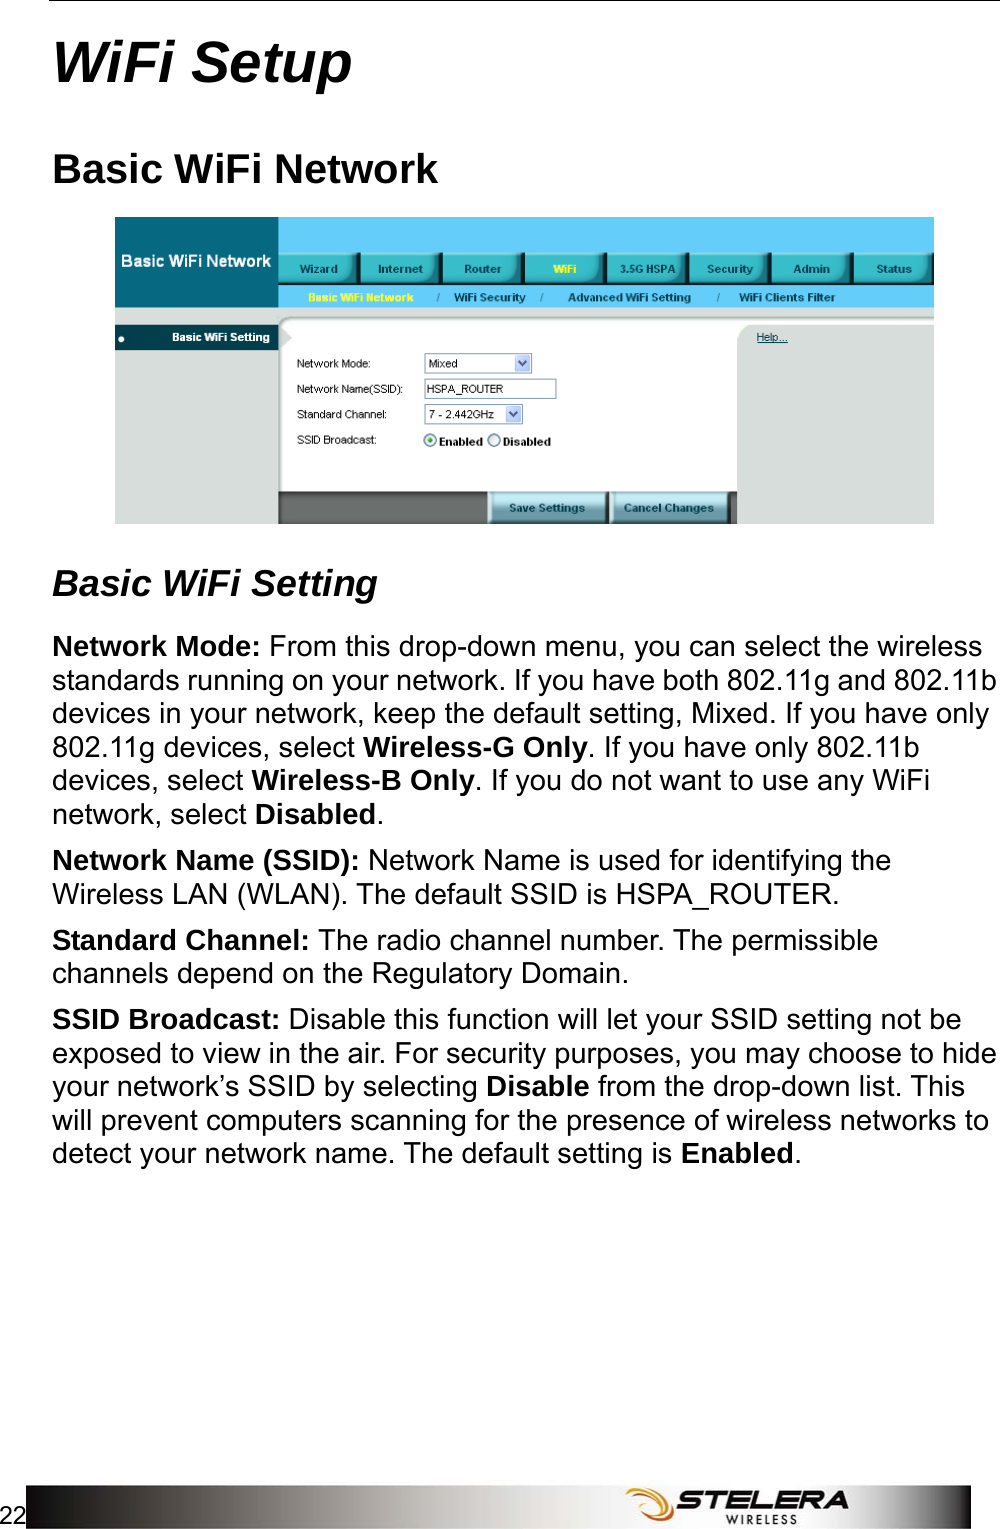 WiFi Setup 22   WiFi Setup Basic WiFi Network  Basic WiFi Setting Network Mode: From this drop-down menu, you can select the wireless standards running on your network. If you have both 802.11g and 802.11b devices in your network, keep the default setting, Mixed. If you have only 802.11g devices, select Wireless-G Only. If you have only 802.11b devices, select Wireless-B Only. If you do not want to use any WiFi network, select Disabled.  Network Name (SSID): Network Name is used for identifying the Wireless LAN (WLAN). The default SSID is HSPA_ROUTER. Standard Channel: The radio channel number. The permissible channels depend on the Regulatory Domain. SSID Broadcast: Disable this function will let your SSID setting not be exposed to view in the air. For security purposes, you may choose to hide your network’s SSID by selecting Disable from the drop-down list. This will prevent computers scanning for the presence of wireless networks to detect your network name. The default setting is Enabled. 